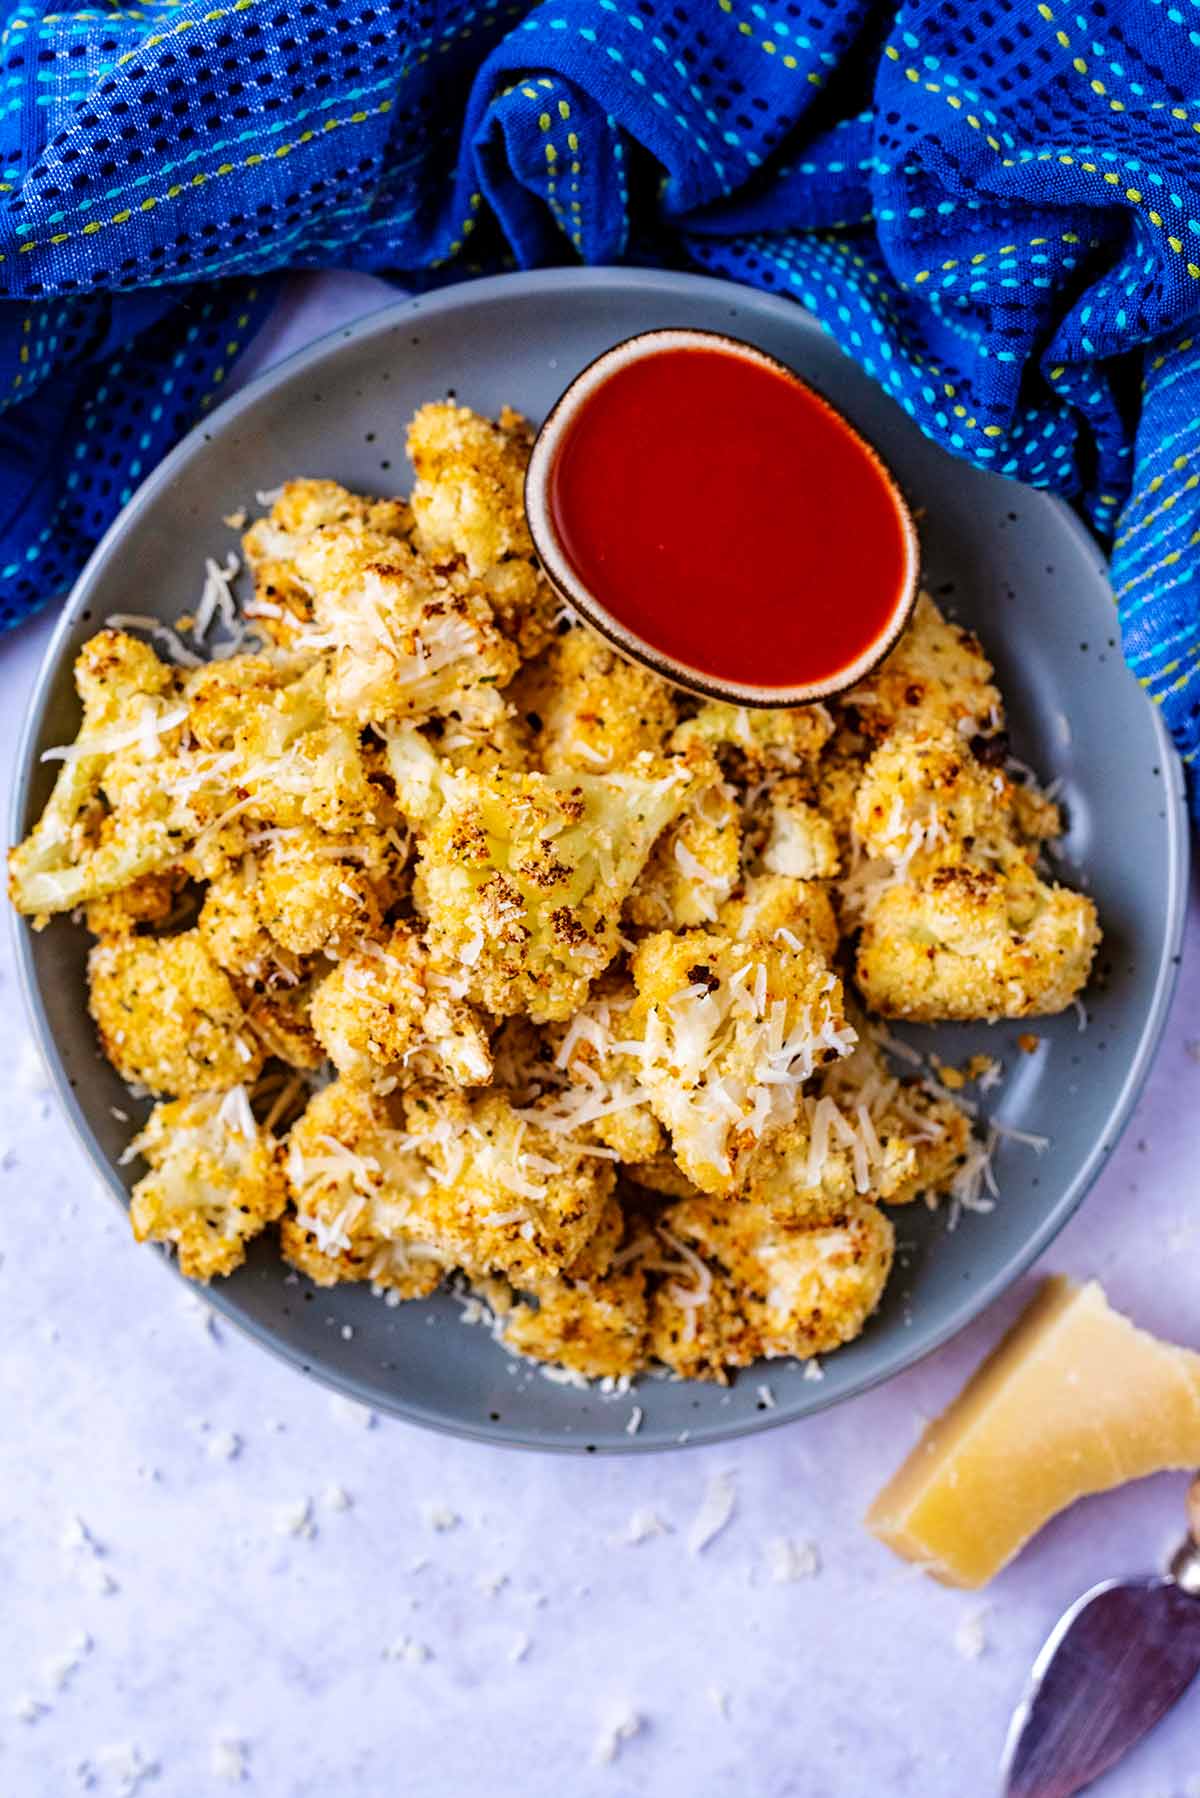 A plate of roasted crispy cauliflower florets and a small bowl of hot sauce.